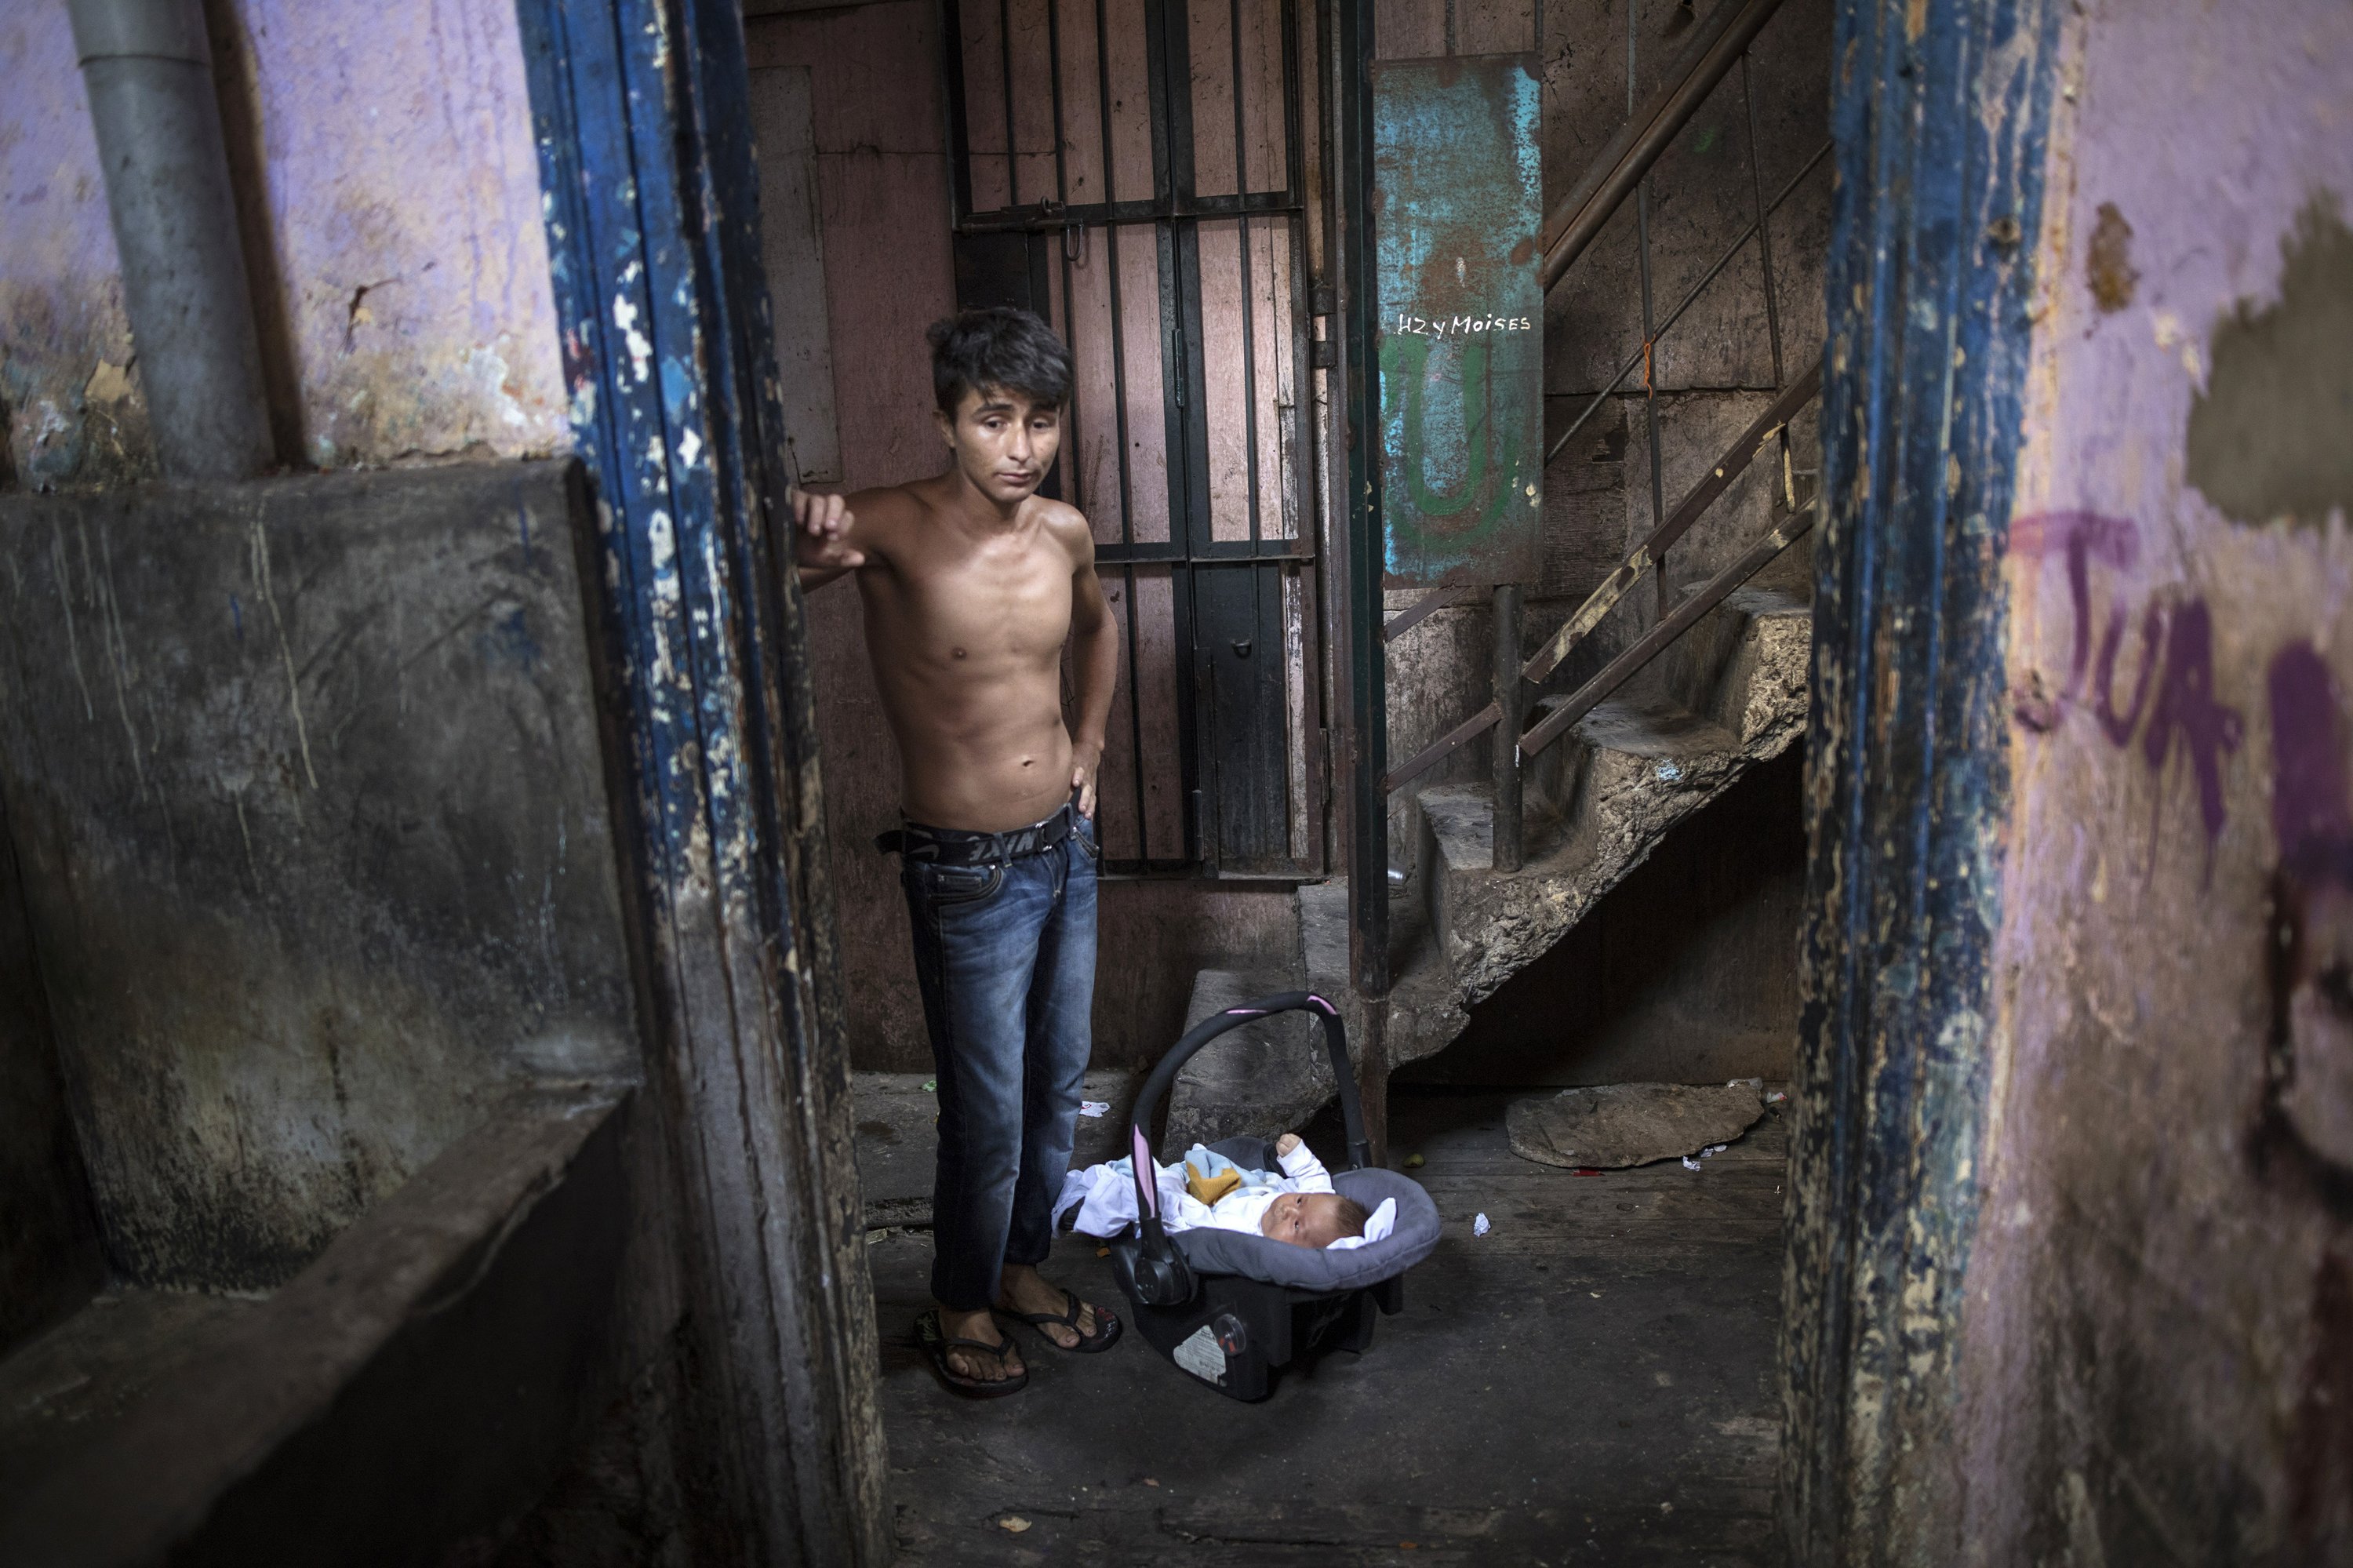 Peruvians Very Poor Boys in Front of Their Homes Editorial Image